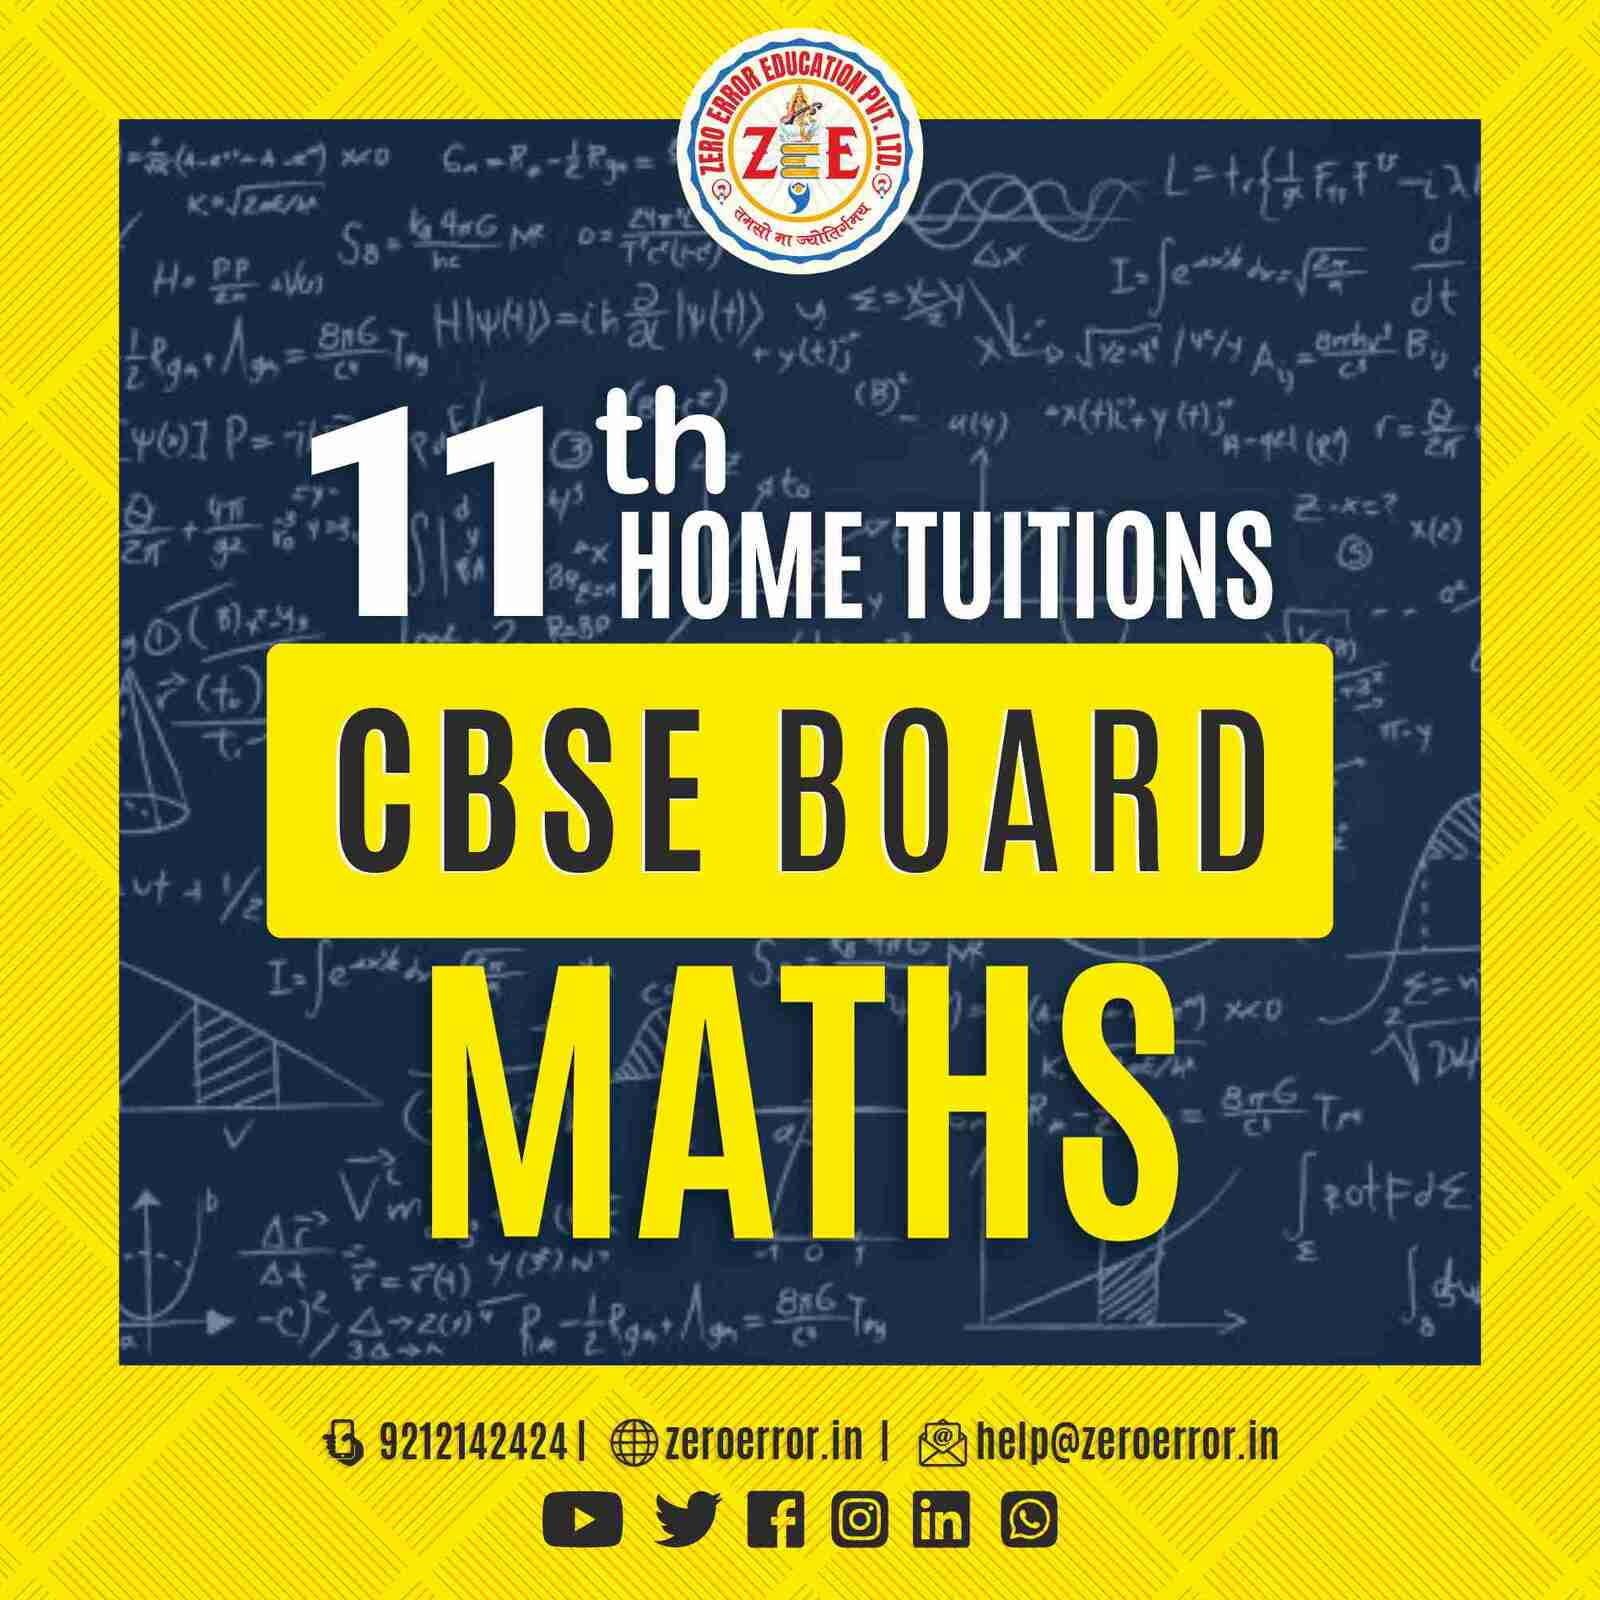 11th Grade CBSE Math's Online Classes by Zero Error Education Prepare for your CBSE board exams with online and offline Math's classes for 11th grade. Learn from experienced home tutors and get all the help you need to succeed. Enroll today at Zero Error Education. [https://zeroerror.in/] Call 9212142424 for more information.